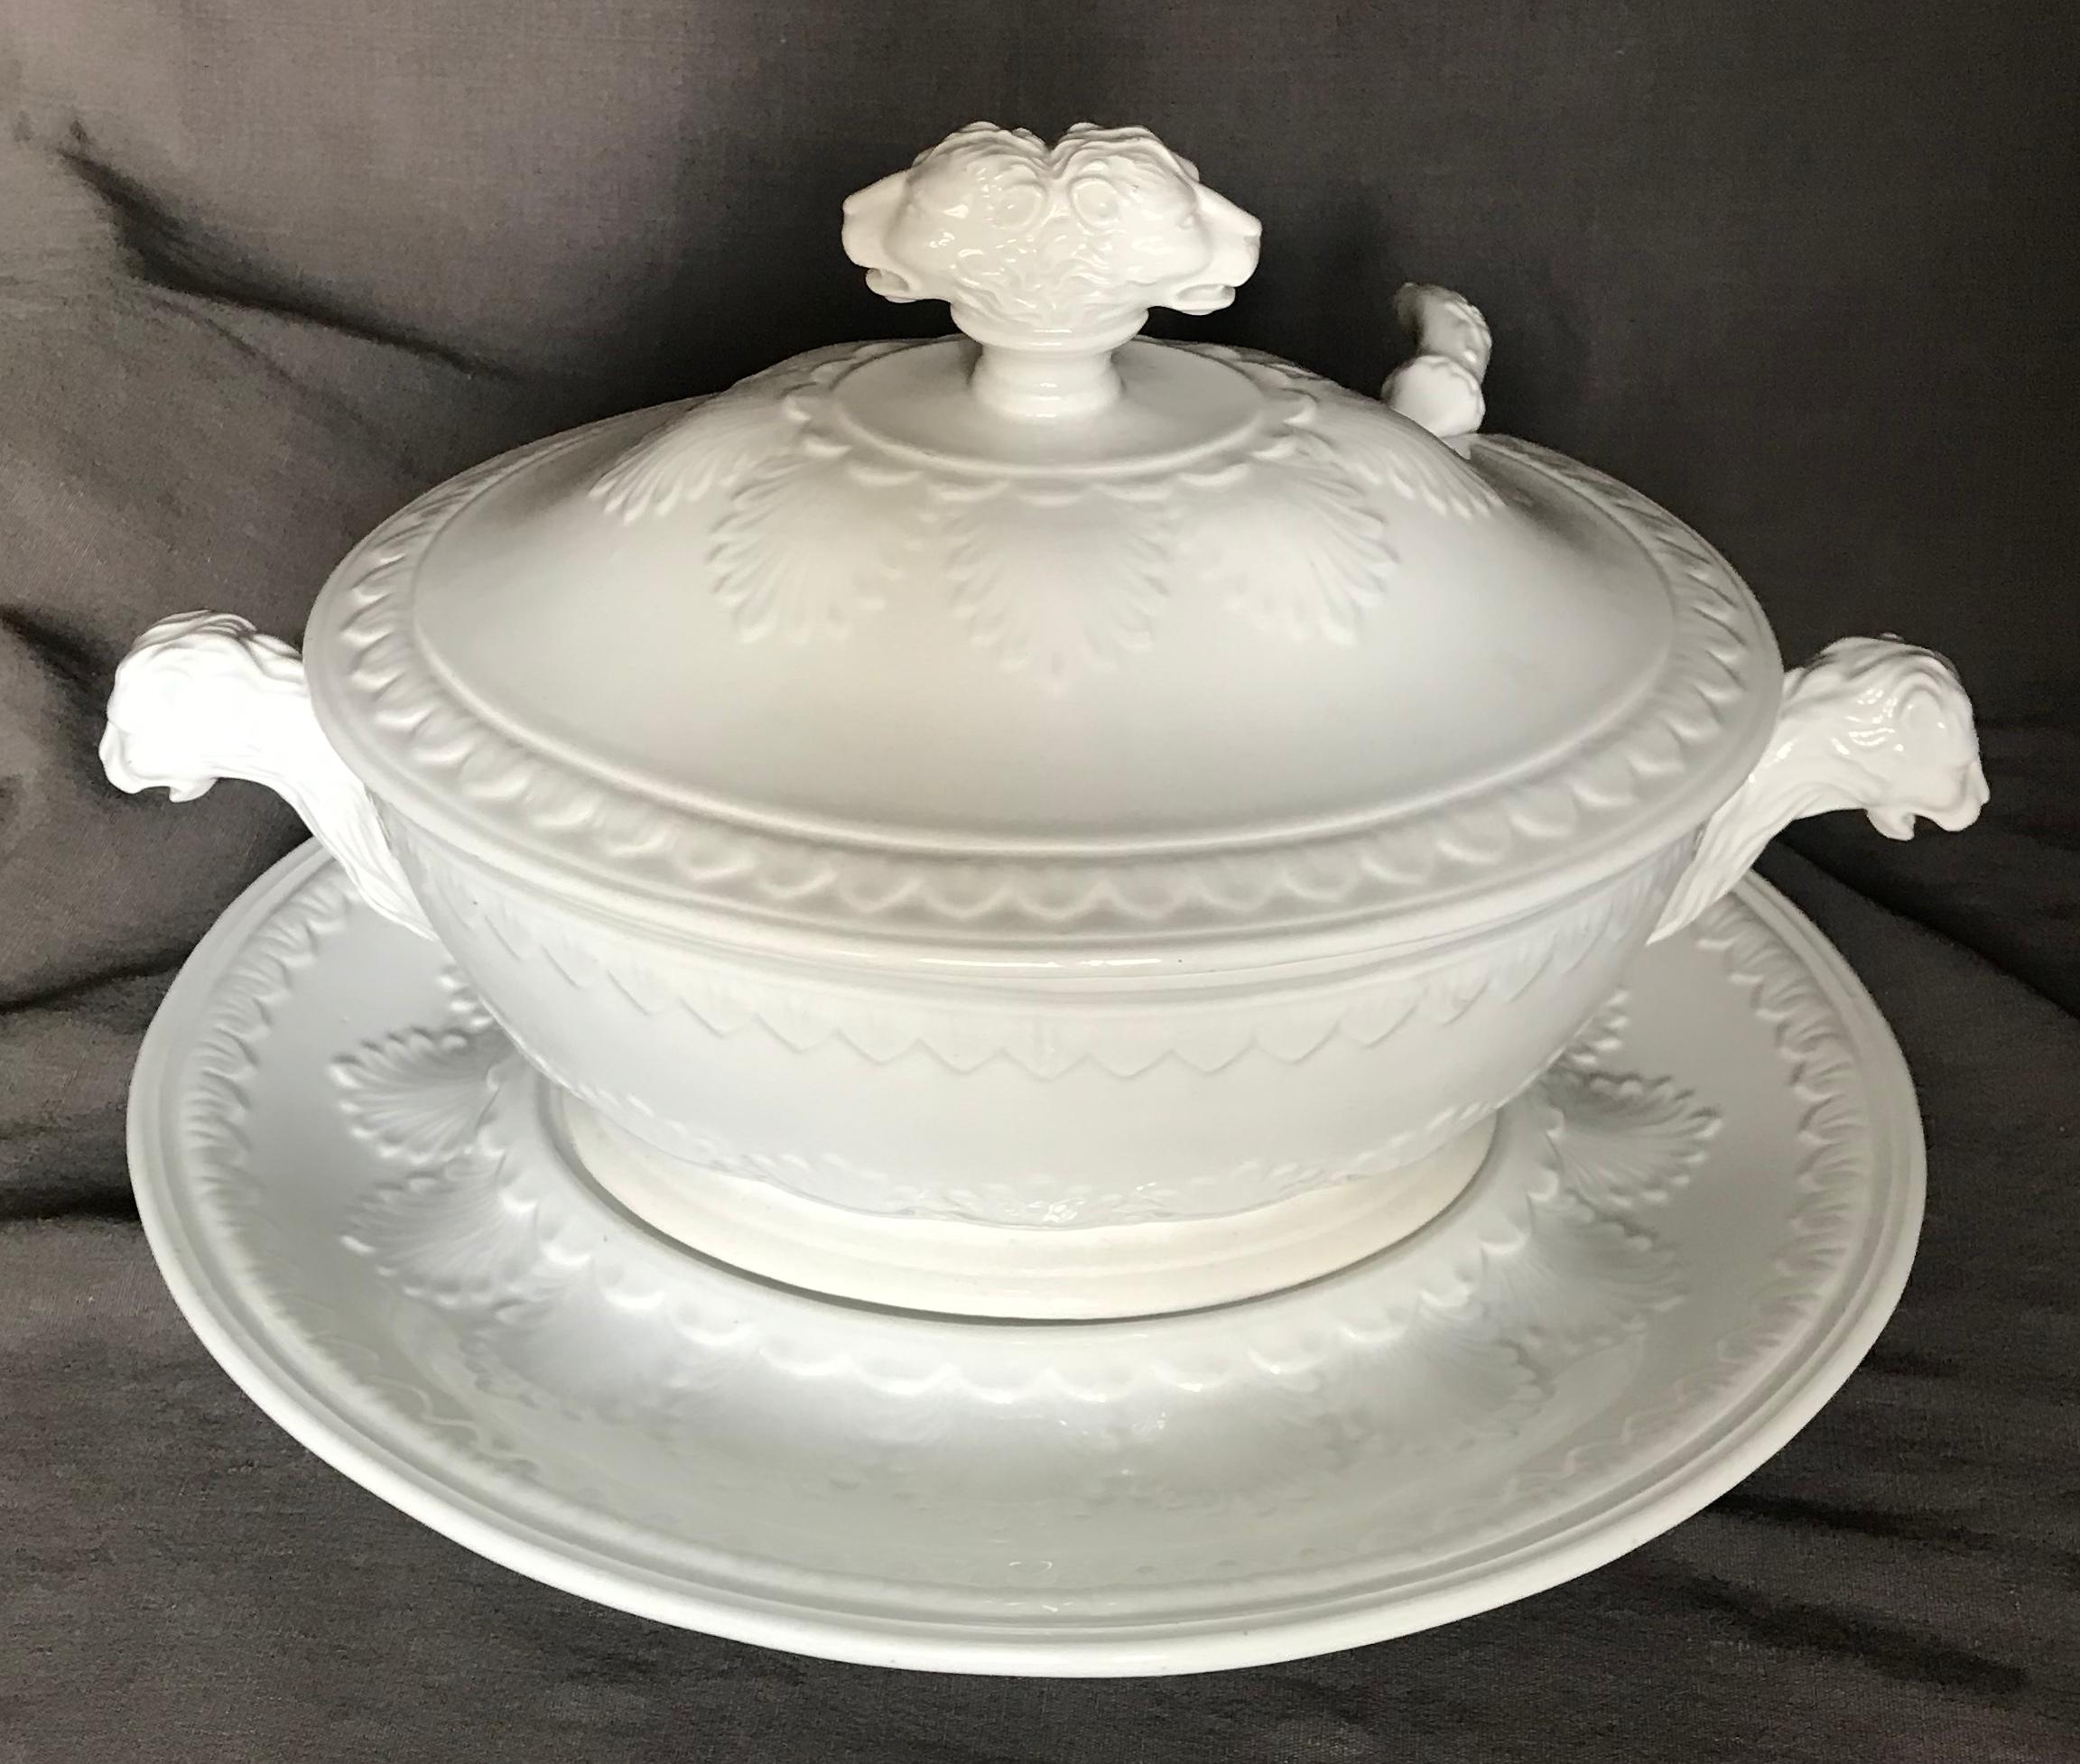 Italian midcentury white lion head tureen with ladle. Large white neoclassical style soup tureen of ovoid form with foliate decoration on lion head handled body, under-plate and lid with double lion-headed knopf; with original ladle and all in